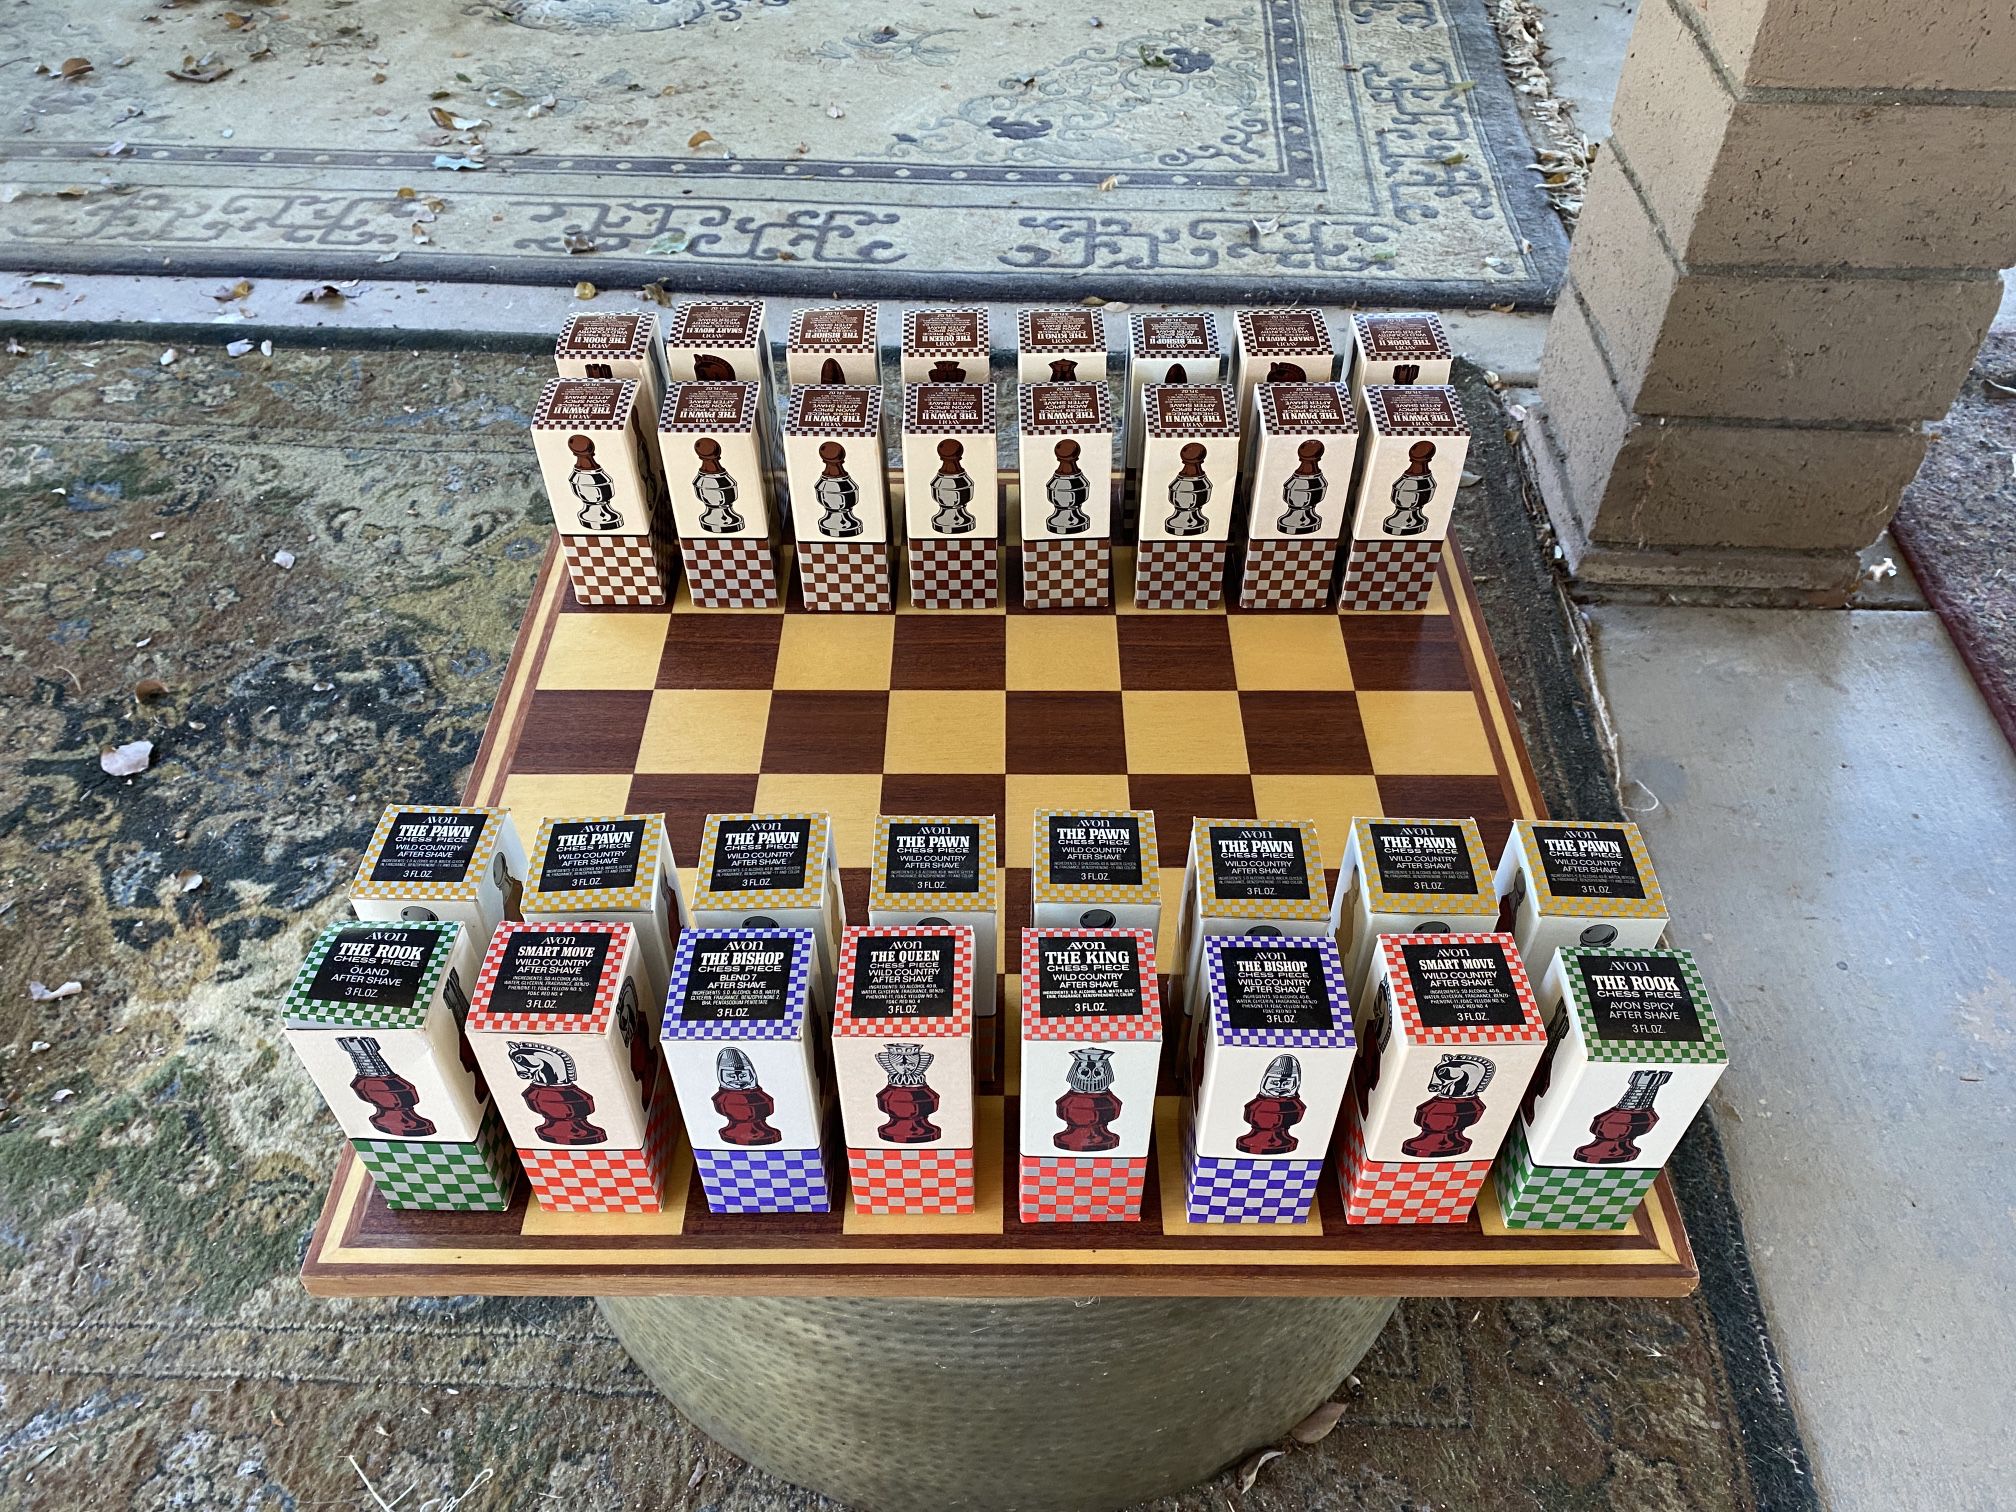 Complete Vintage Avon Perfume Chess Set With Chess Board 